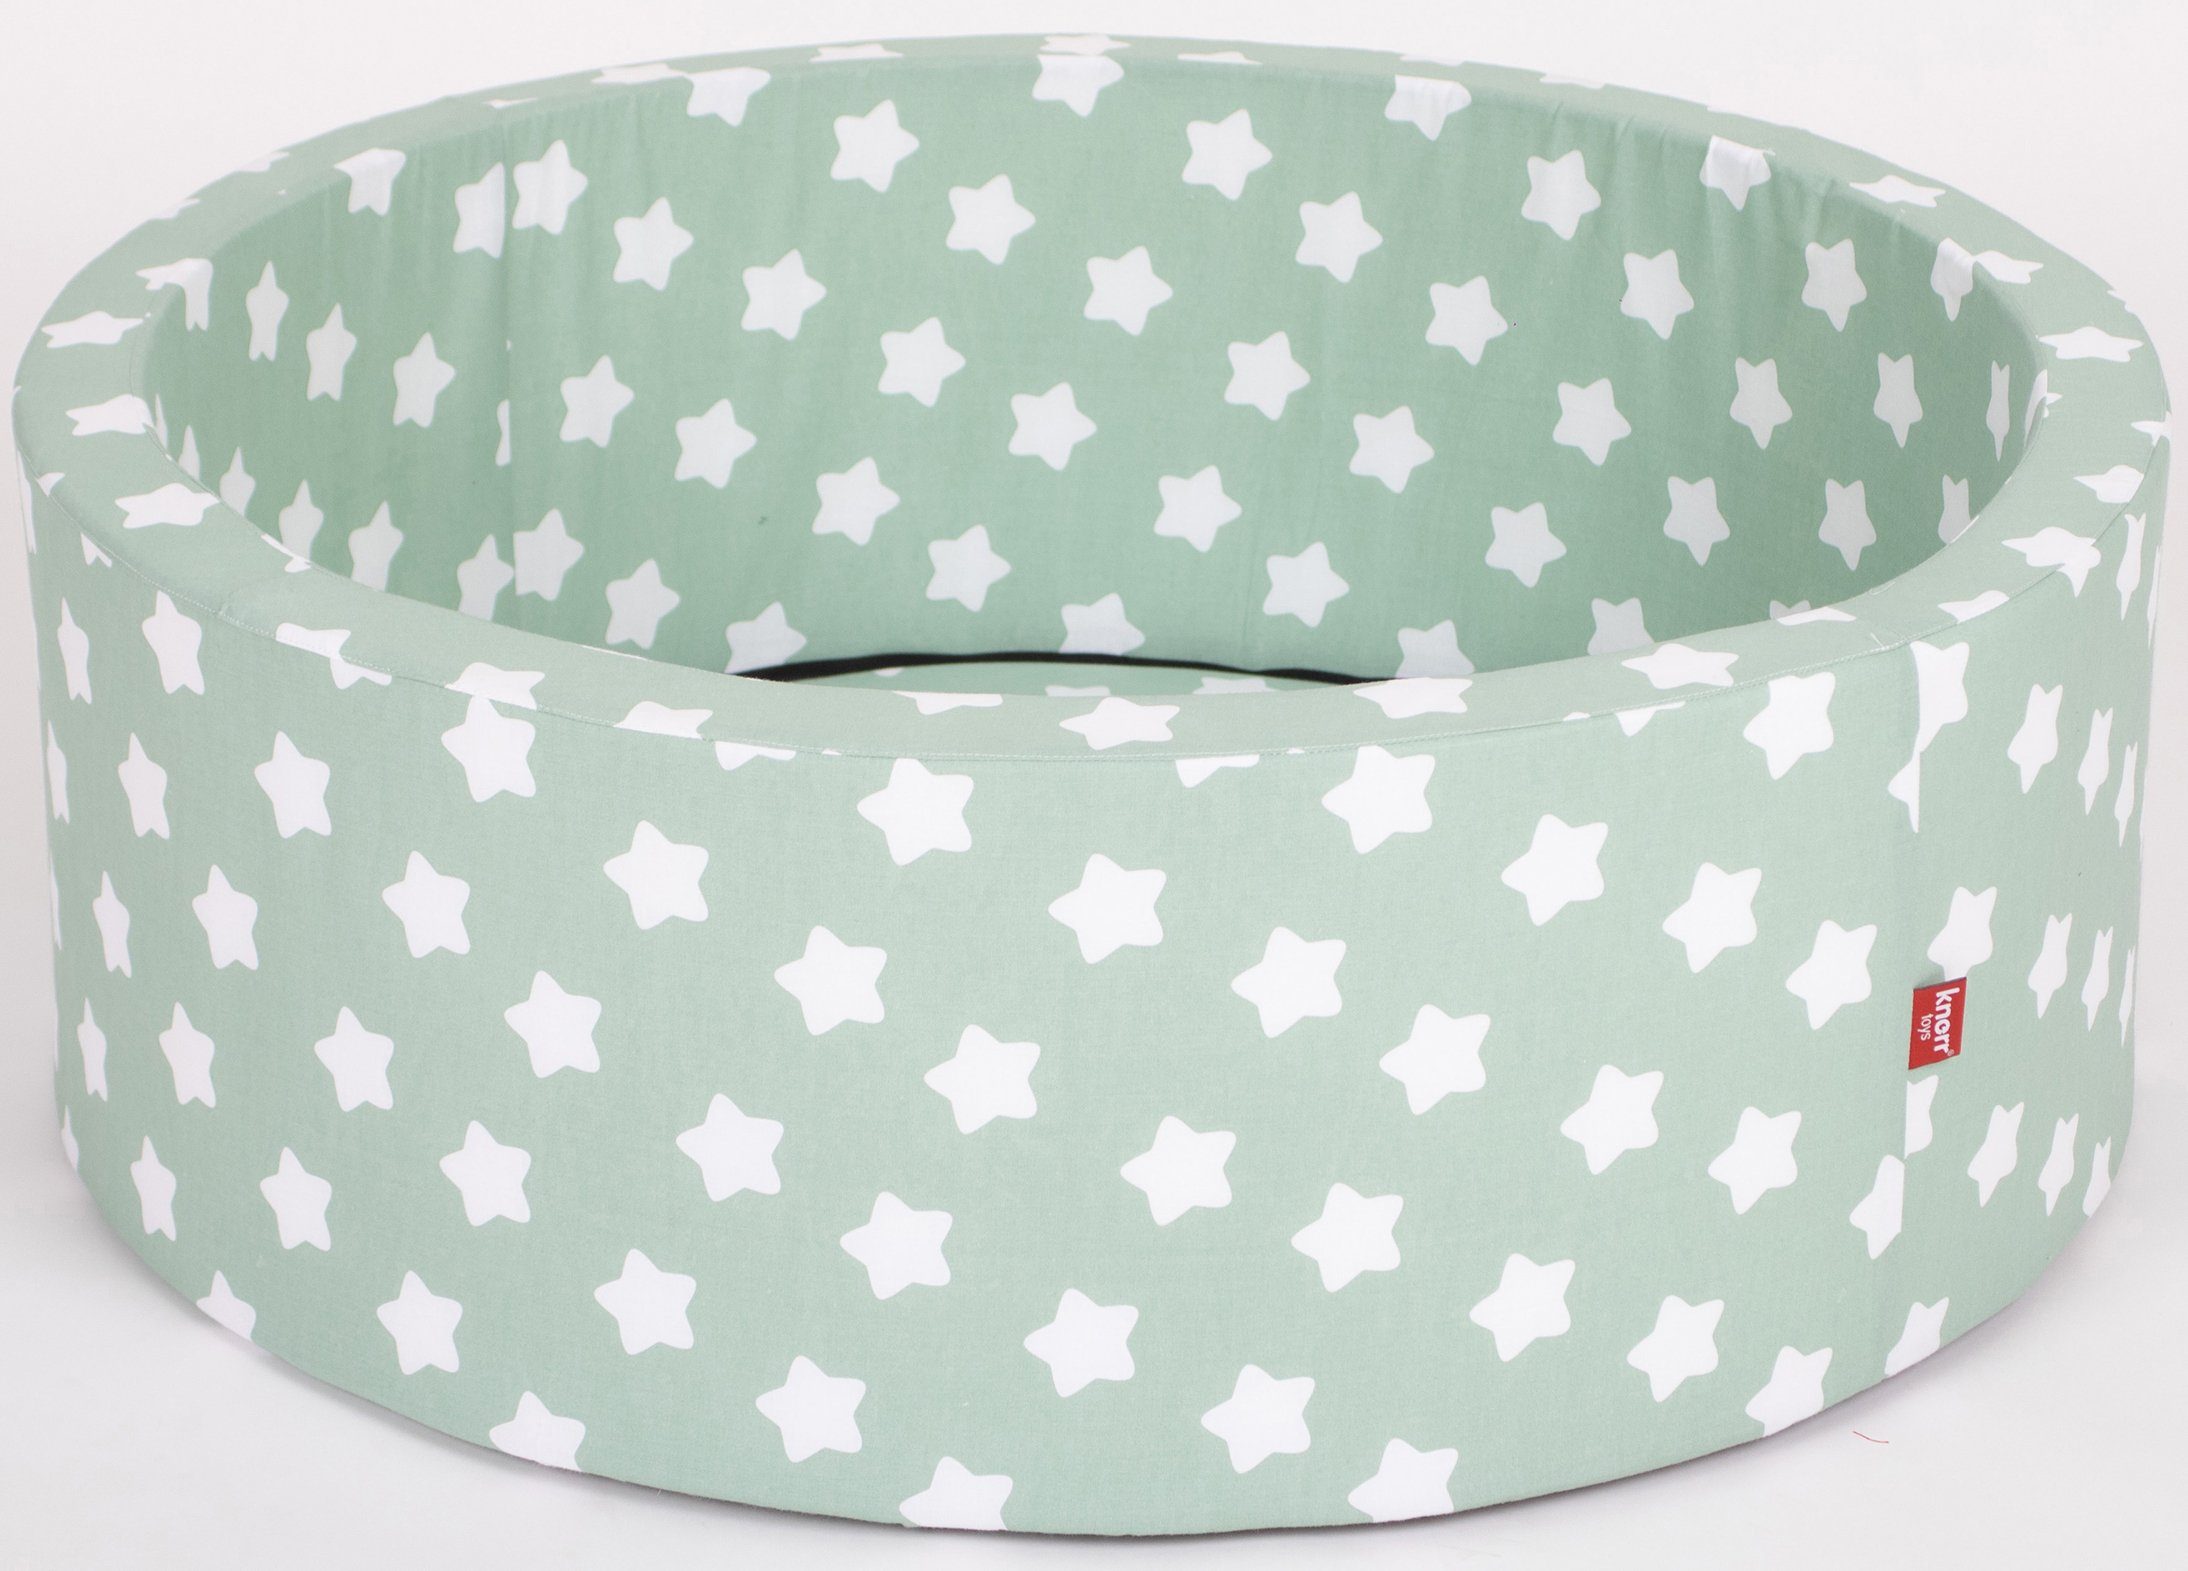 Knorrtoys® Bällebad Soft, Green White Stars, mit300 Bälle grey/white/transparent; Made in Europe